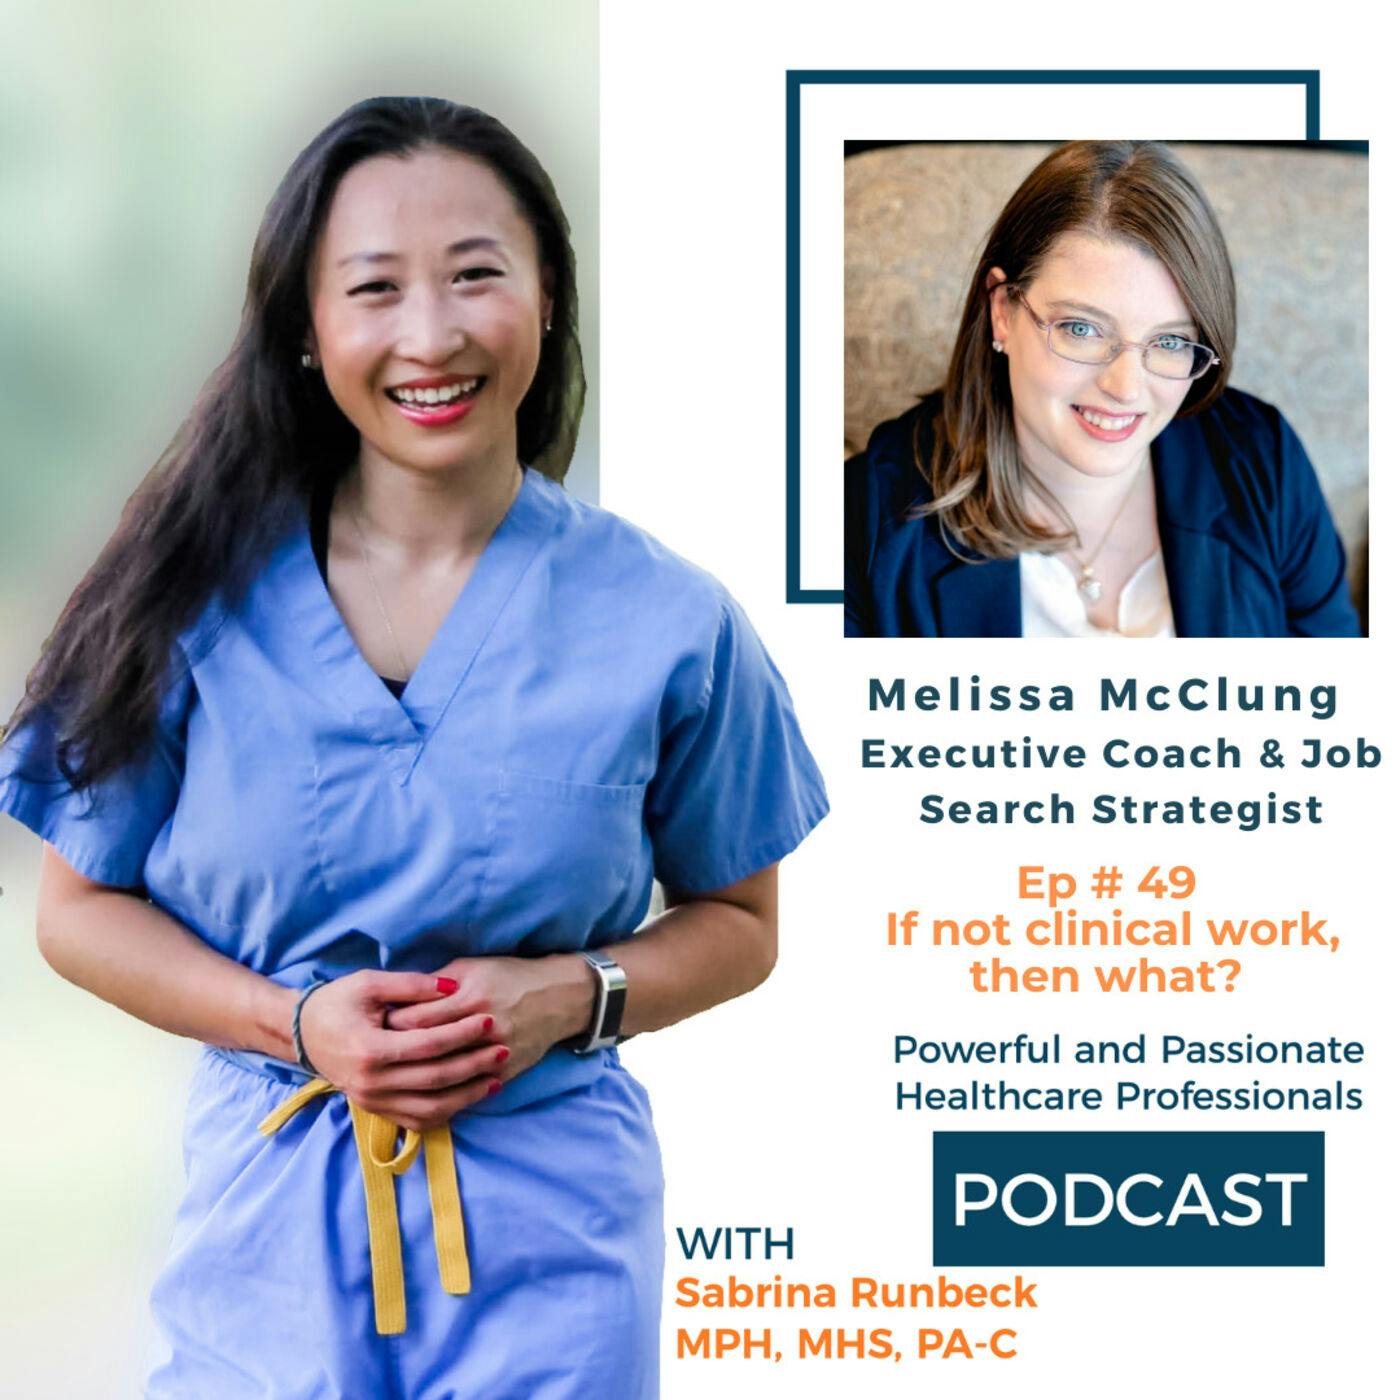 Ep 49 – If not clinical work, then what? with Melissa McClung